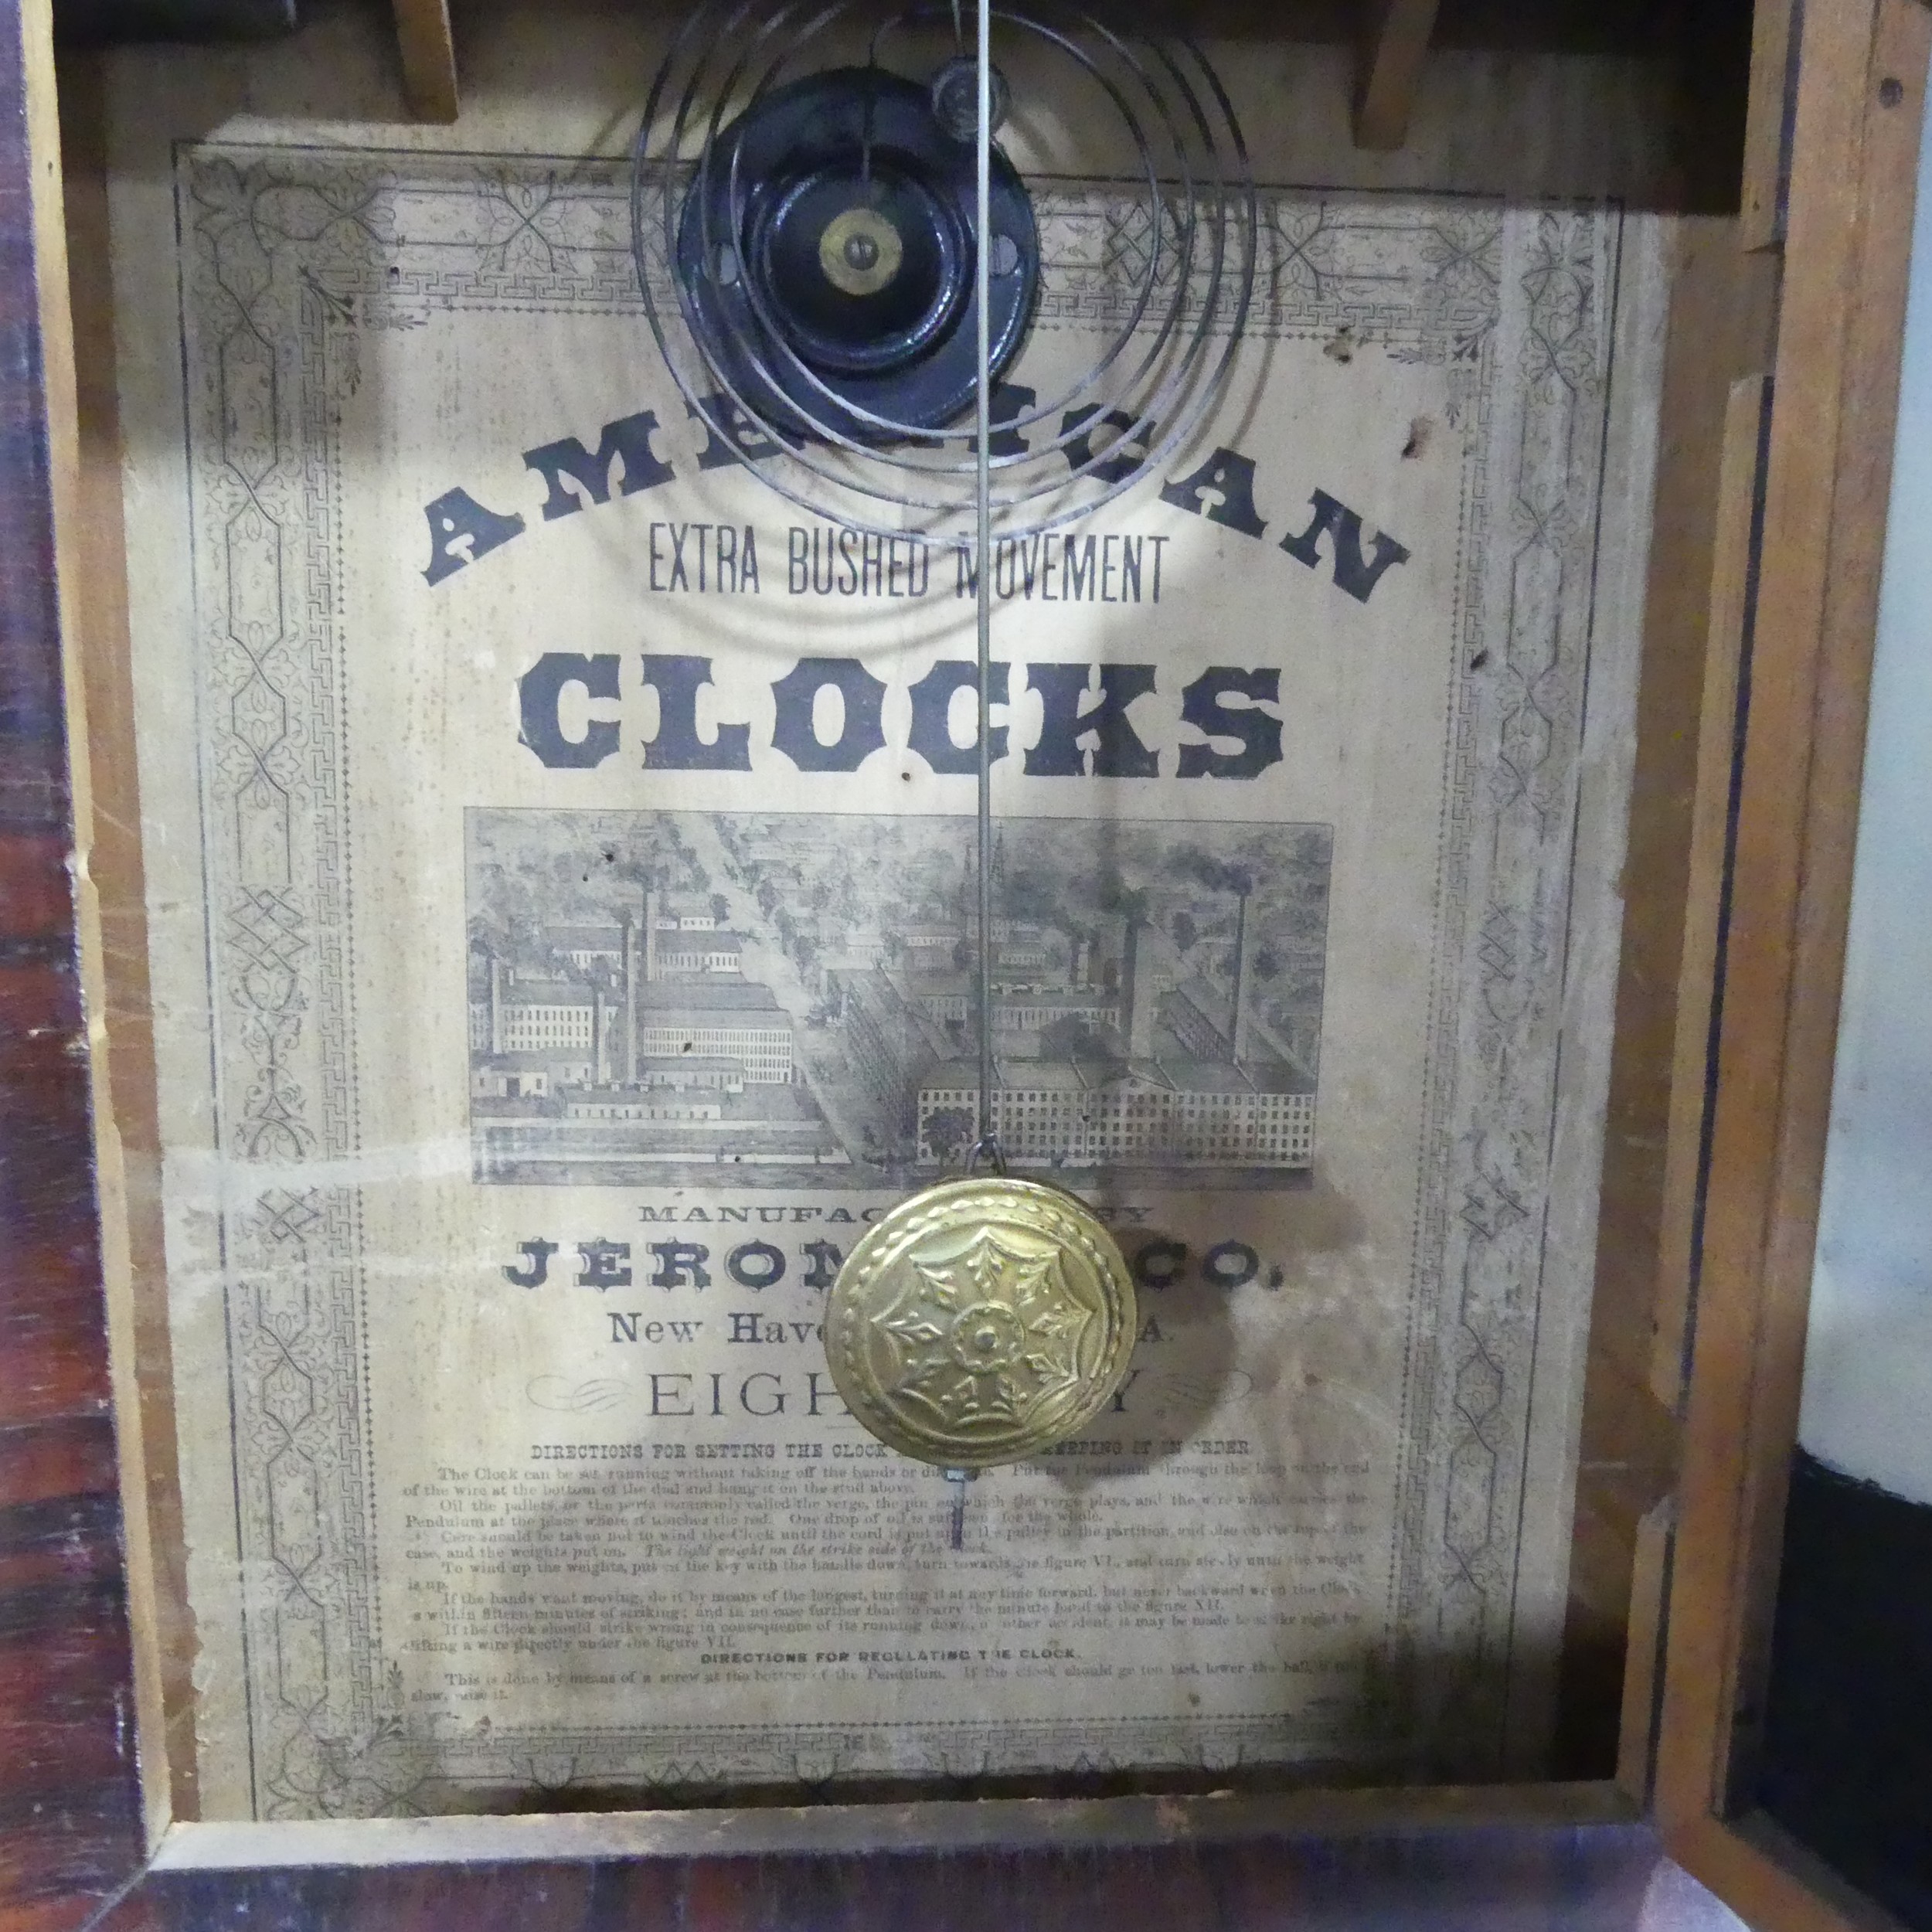 A late 19th century American Wall Clock, manufactured by 'Jerome & Co', W 42 cm x H 76 cm x D 11 cm. - Image 3 of 3